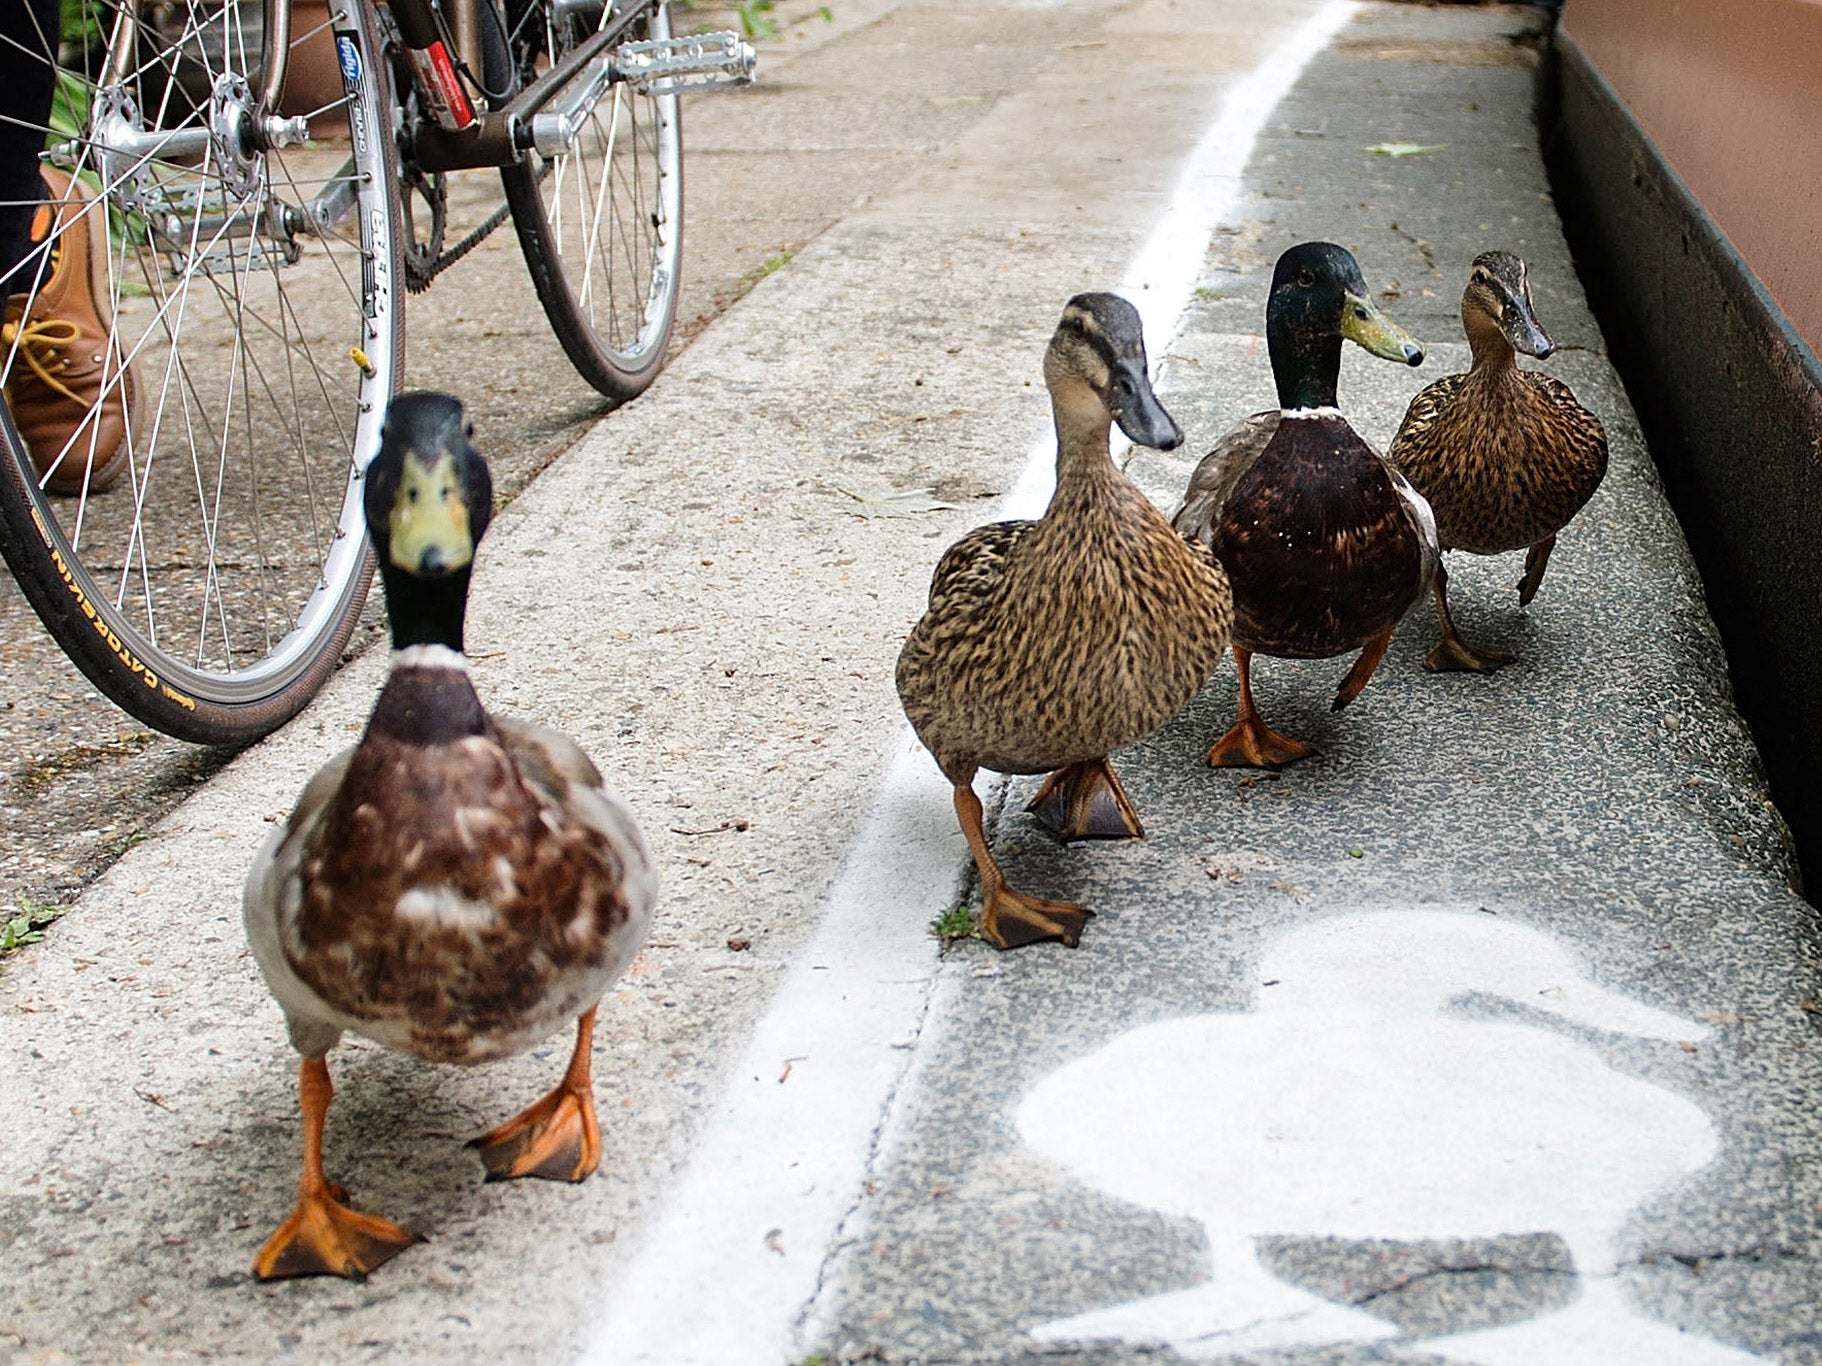 This is a picture of some ducks